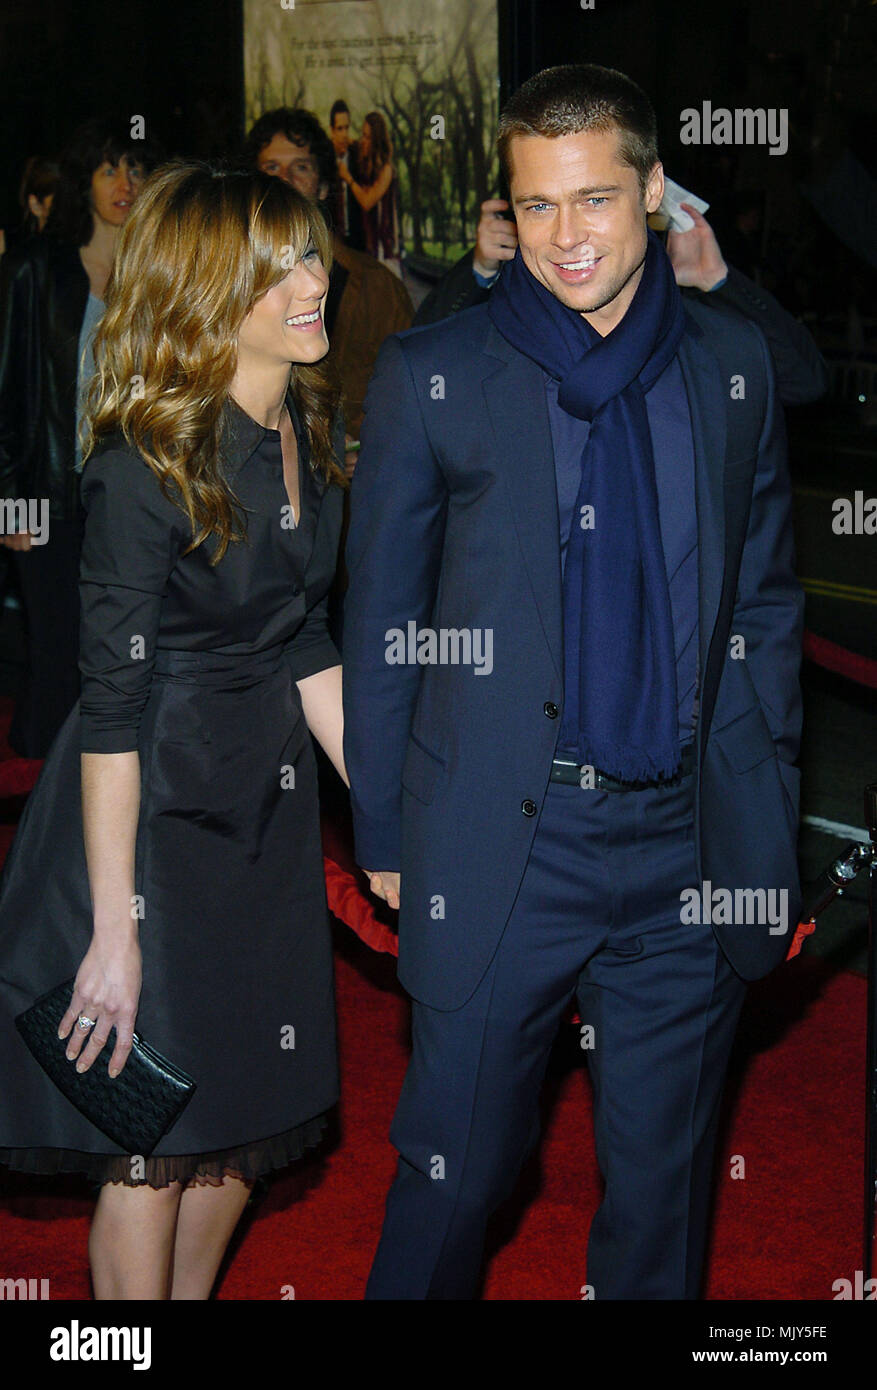 Brad Pitt and Jennifer Aniston arriving at the premiere of ' Along Came Polly ' at the Chinese Theatre in Los Angeles. january 12, 2004.          -            AnistonJenn PittBrad027.JPG           -              AnistonJenn PittBrad027.JPGAnistonJenn PittBrad027  Event in Hollywood Life - California,  Red Carpet Event, Vertical, USA, Film Industry, Celebrities,  Photography, Bestof, Arts Culture and Entertainment, Topix Celebrities fashion /  from the Red Carpet-, Vertical, Best of, Hollywood Life, Event in Hollywood Life - California,  Red Carpet , USA, Film Industry, Celebrities,  movie cele Stock Photo